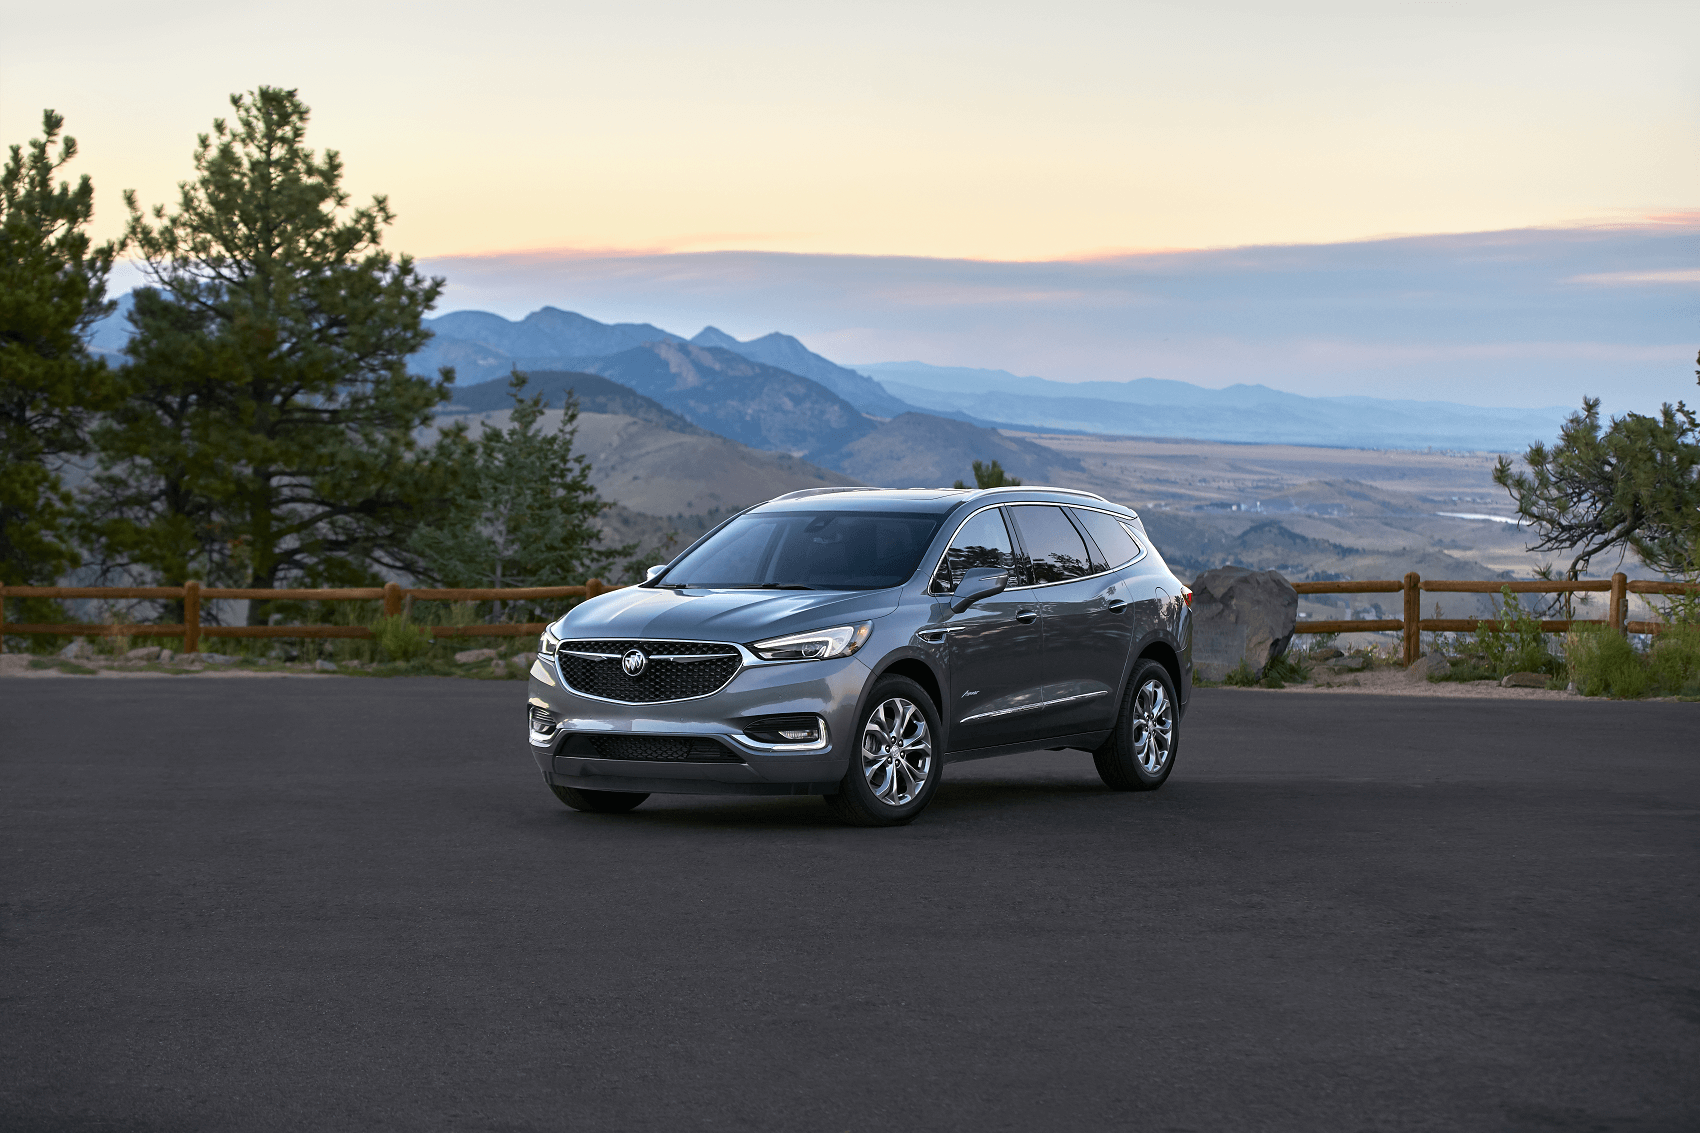 Buick Enclave for Sale Anderson IN 